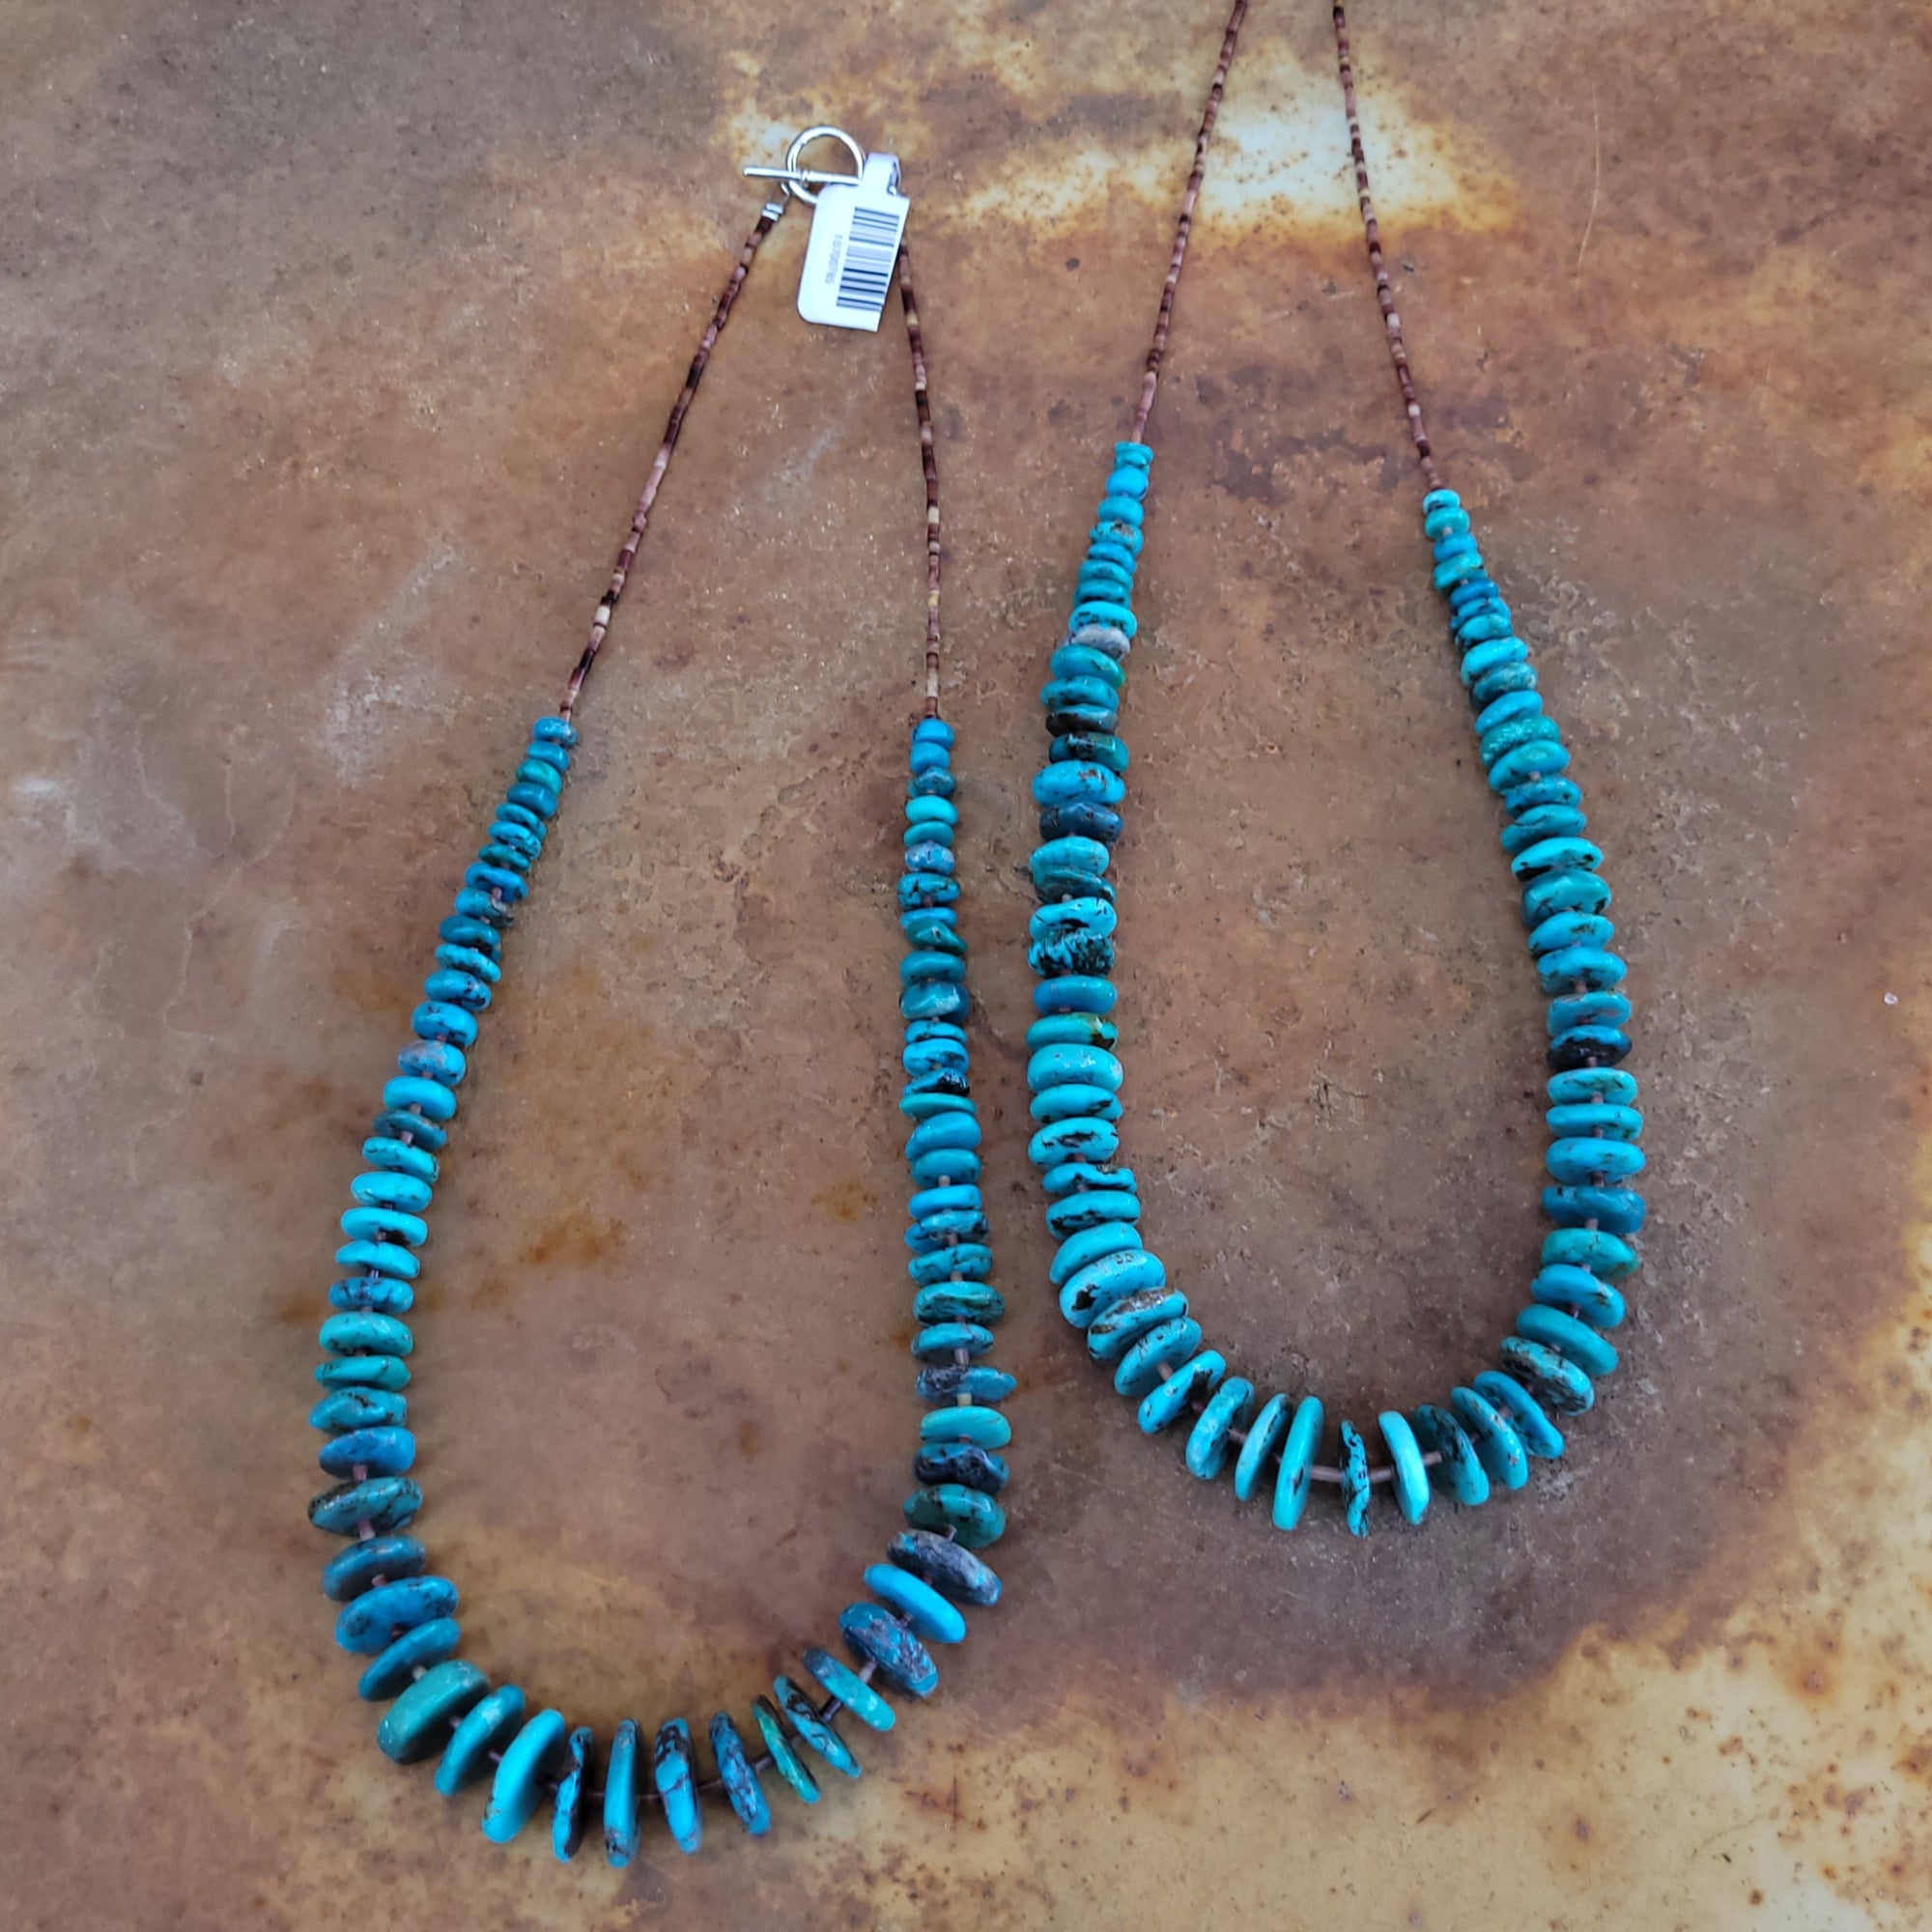 Necklace - 22" Graduated Genuine Turquoise with Heishi Shell